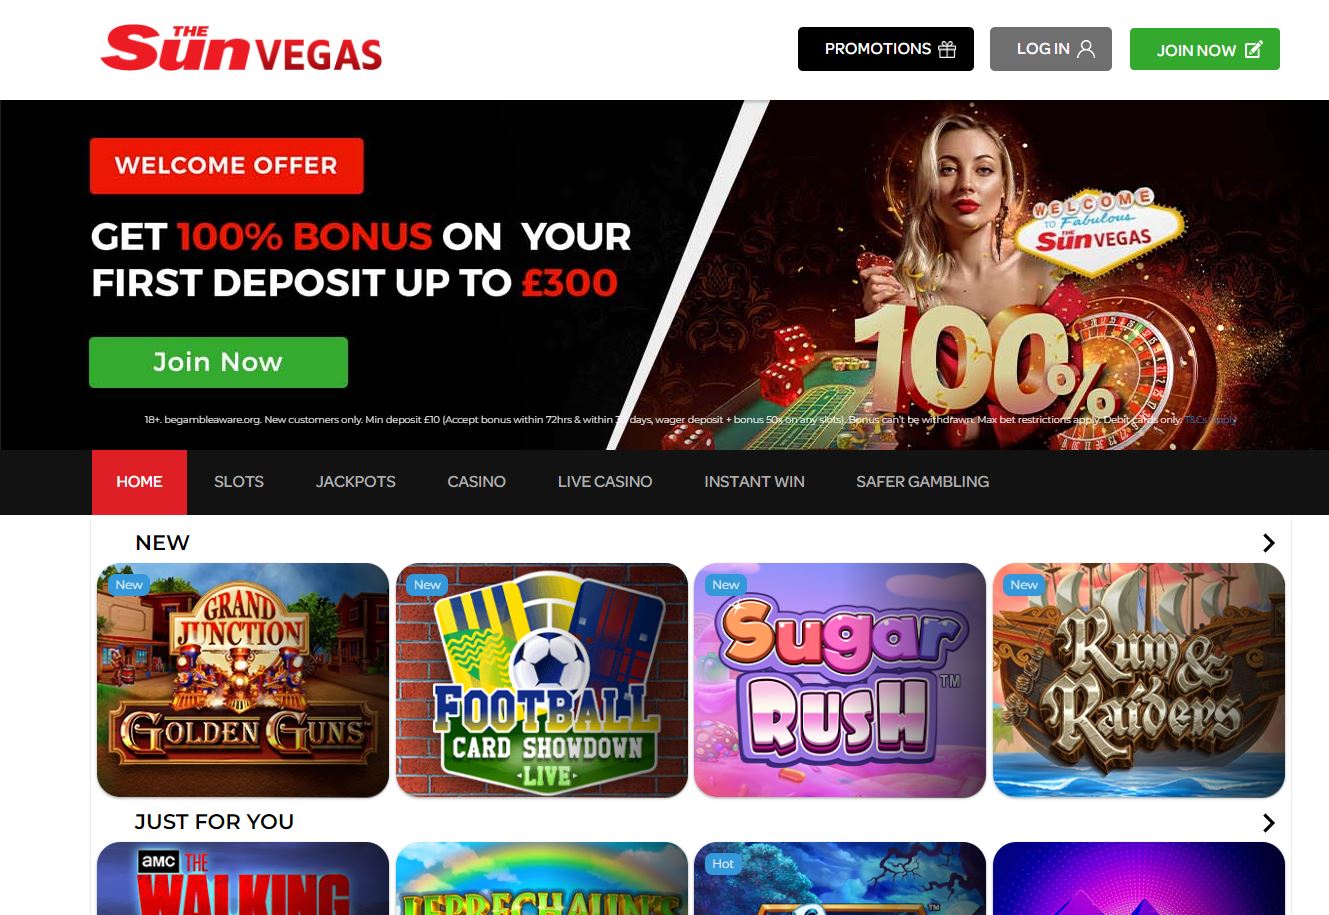 Why You Should Play Online Casino Games at The Sun Vegas